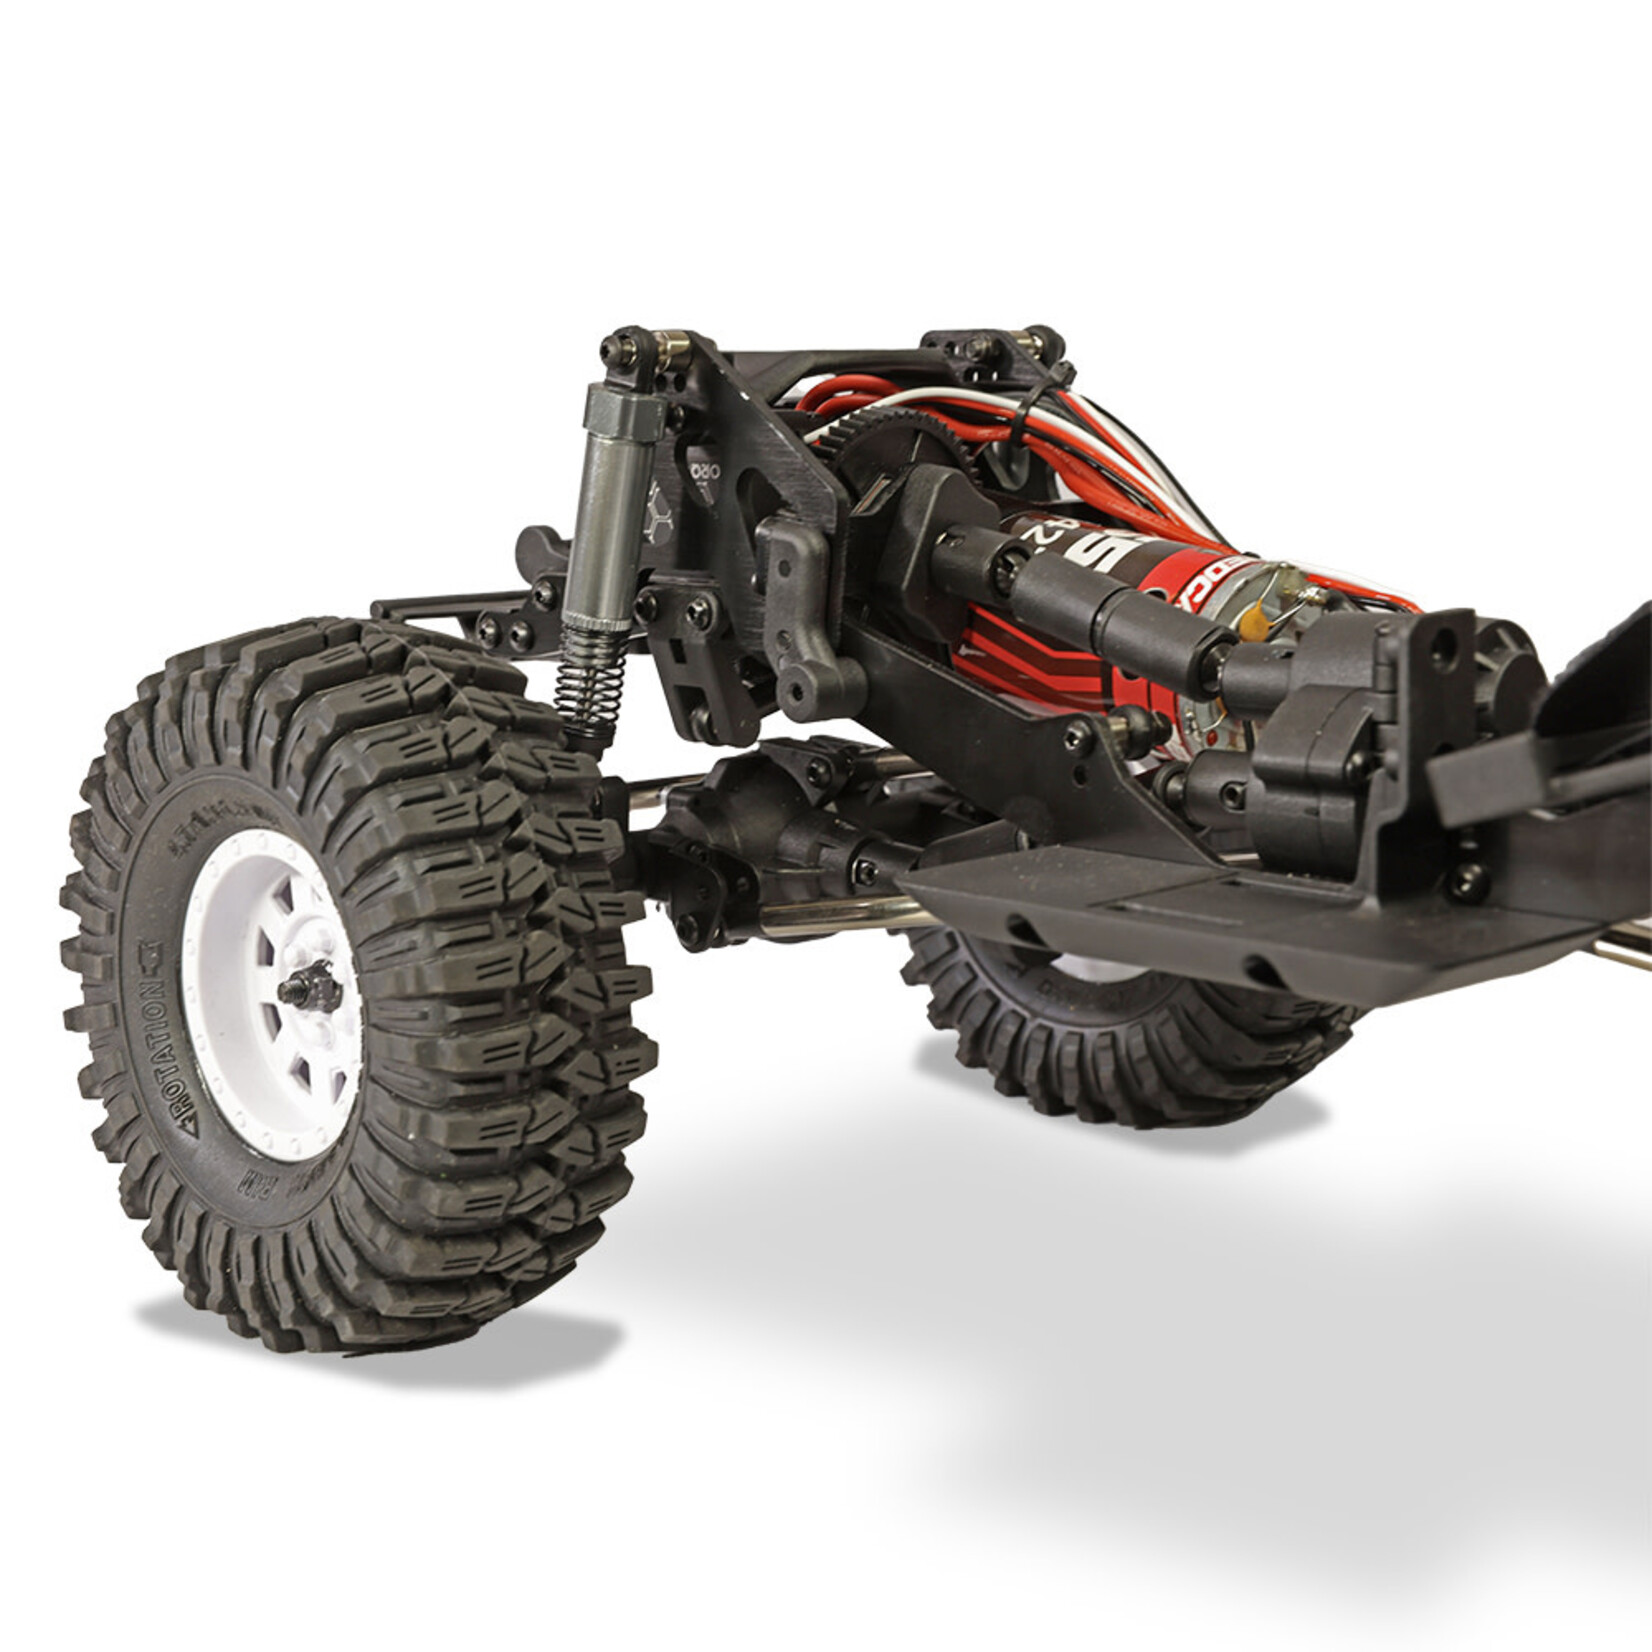 Redcat Racing Everest Ascent 1/10 Scale Crawler - RED